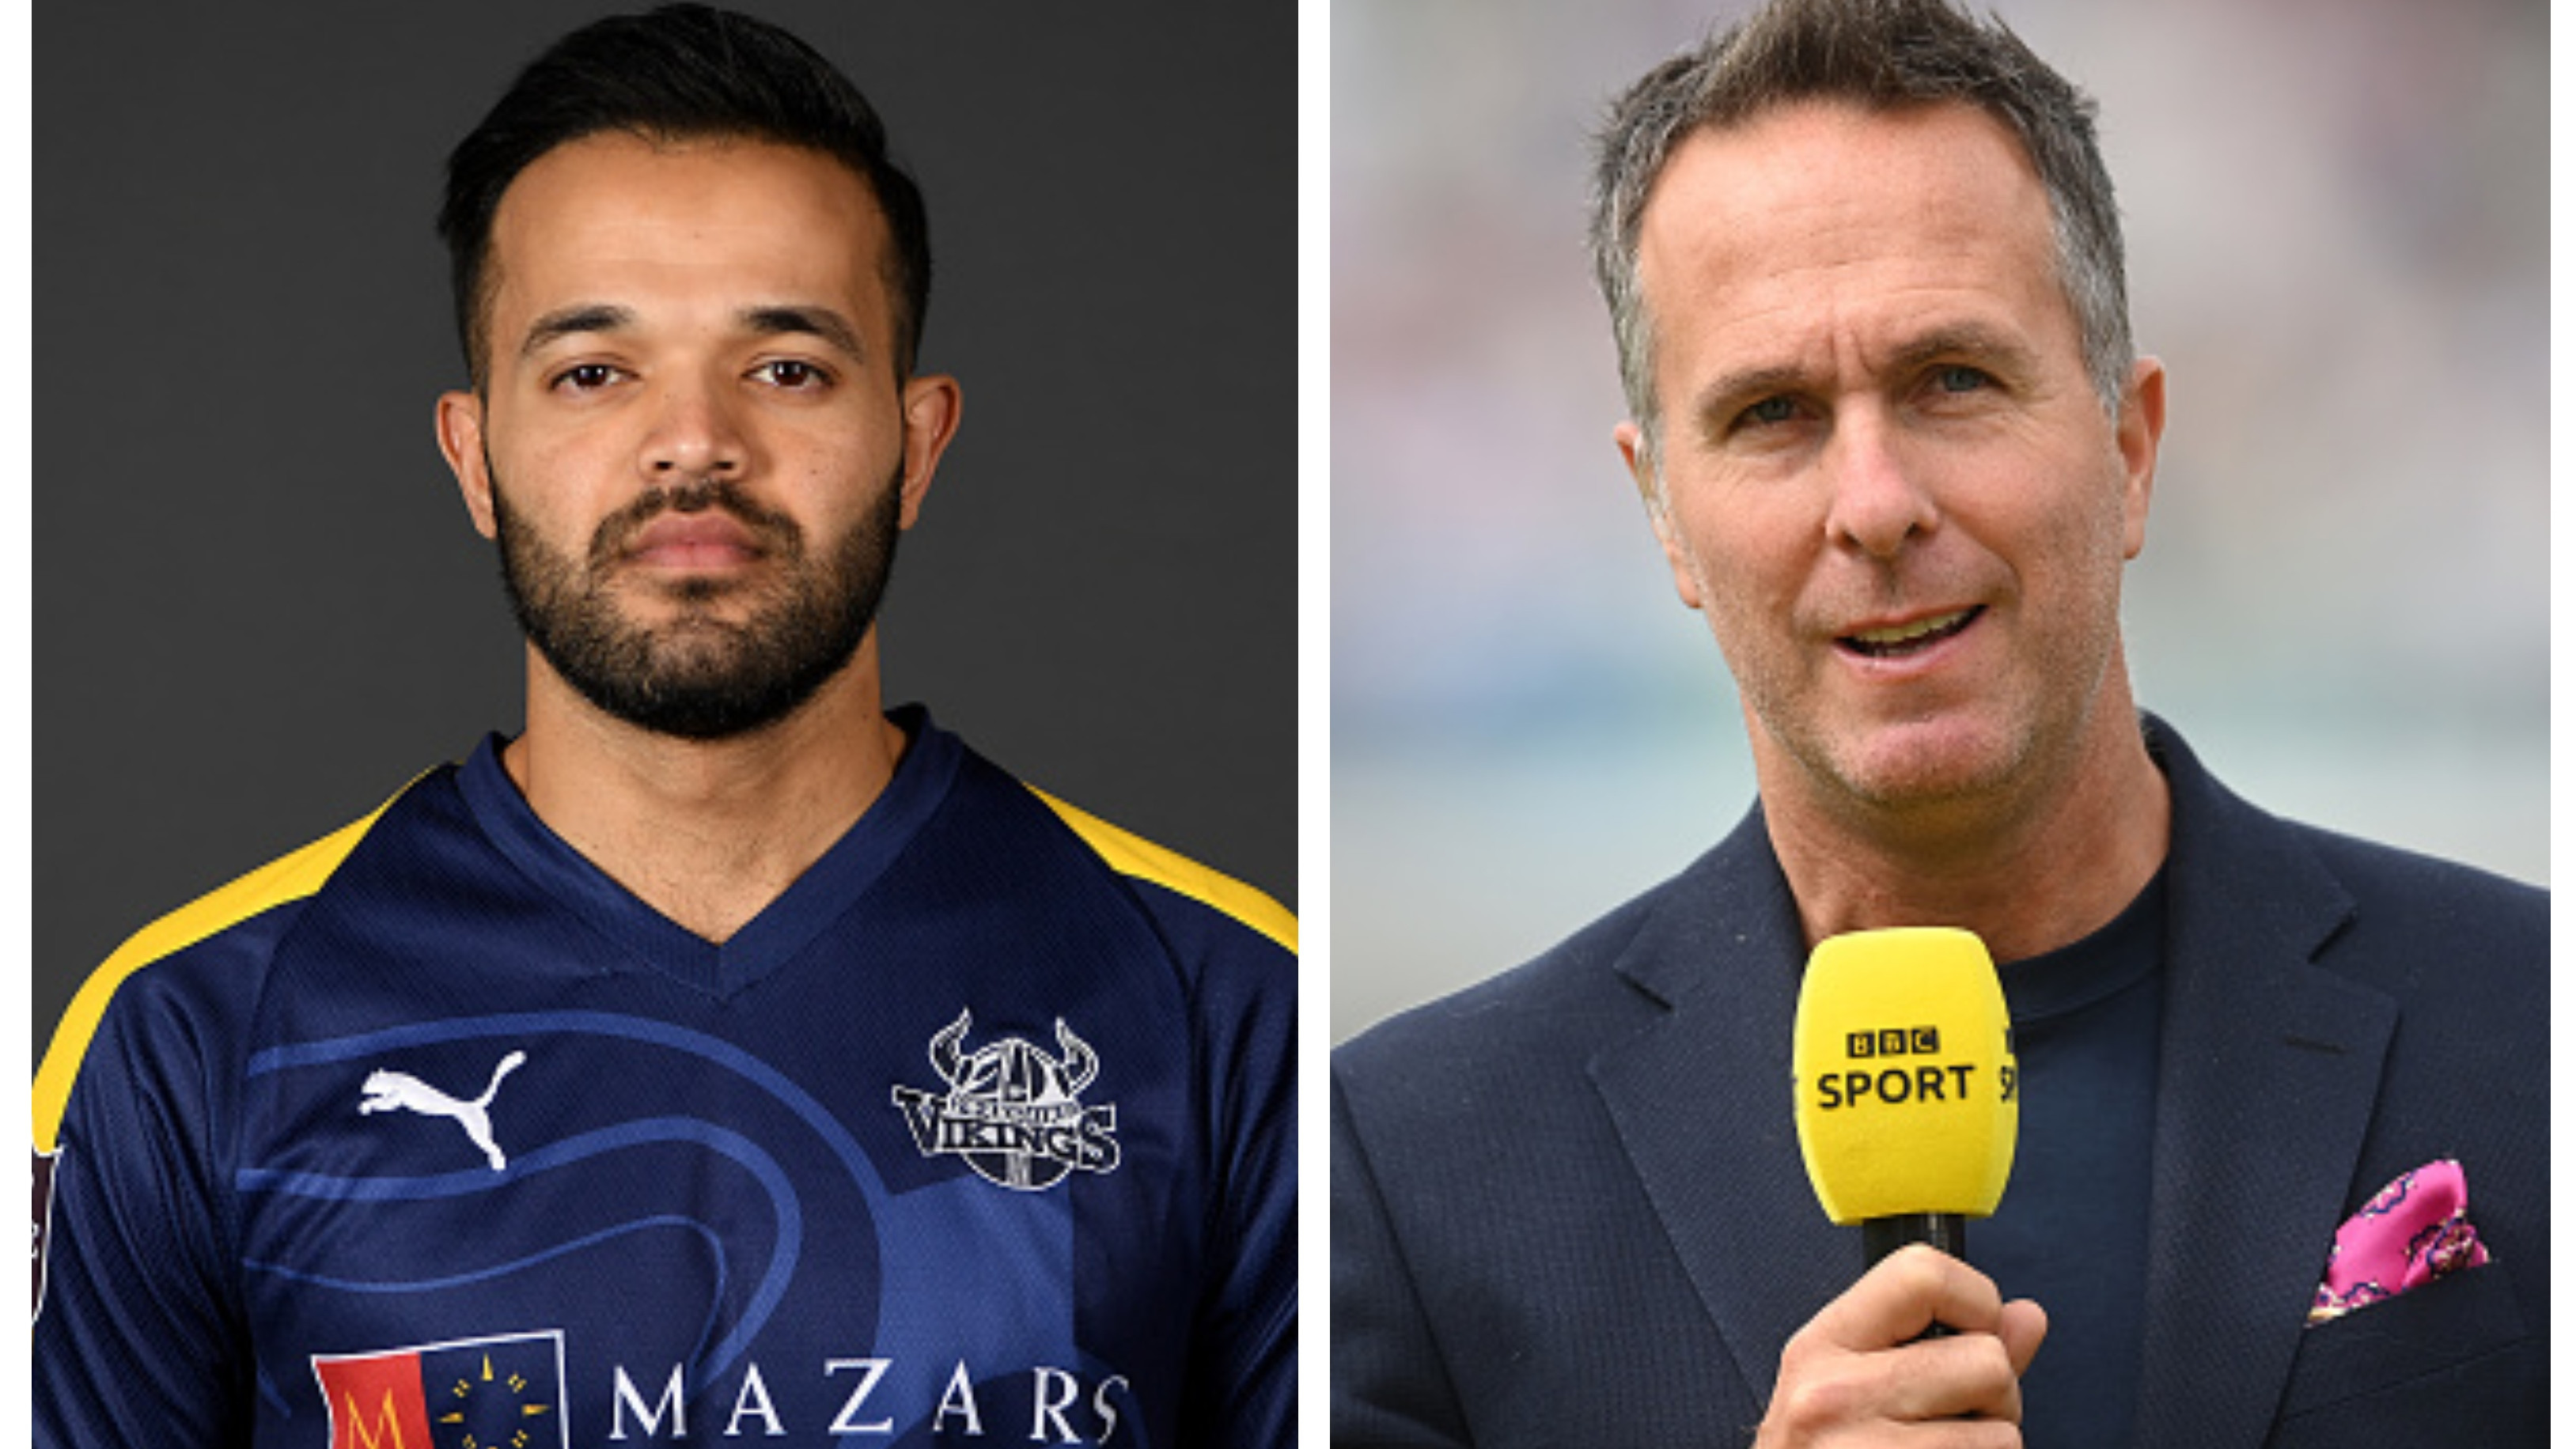 Michael Vaughan ‘sorry’ for hurt Azeem Rafiq suffered at Yorkshire, apologises for offensive historic tweets